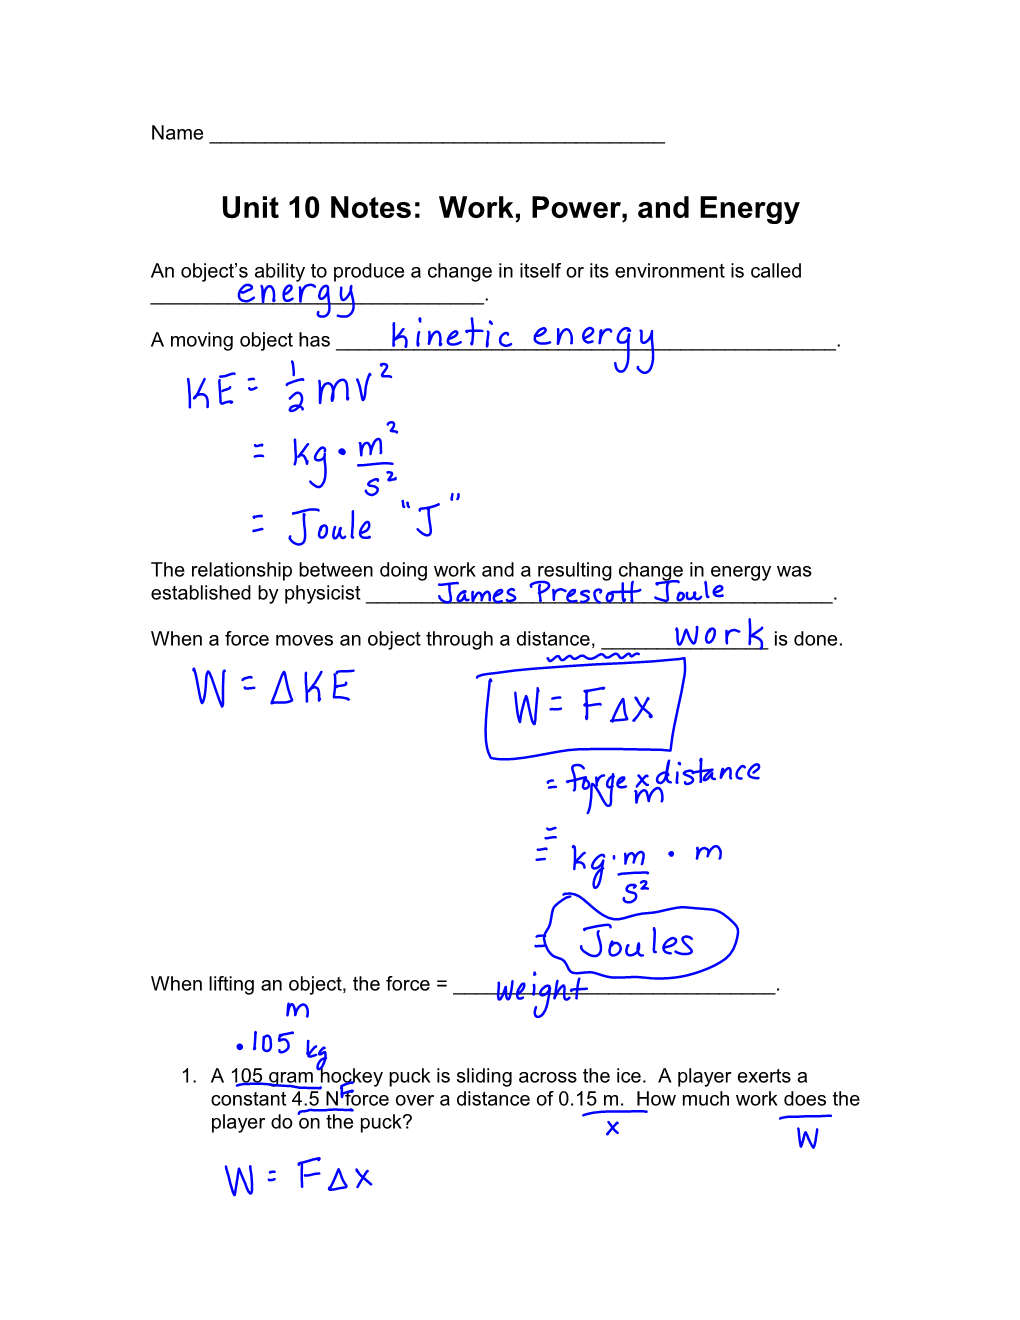 Unit 10 Notes: Work, Power, and Energy